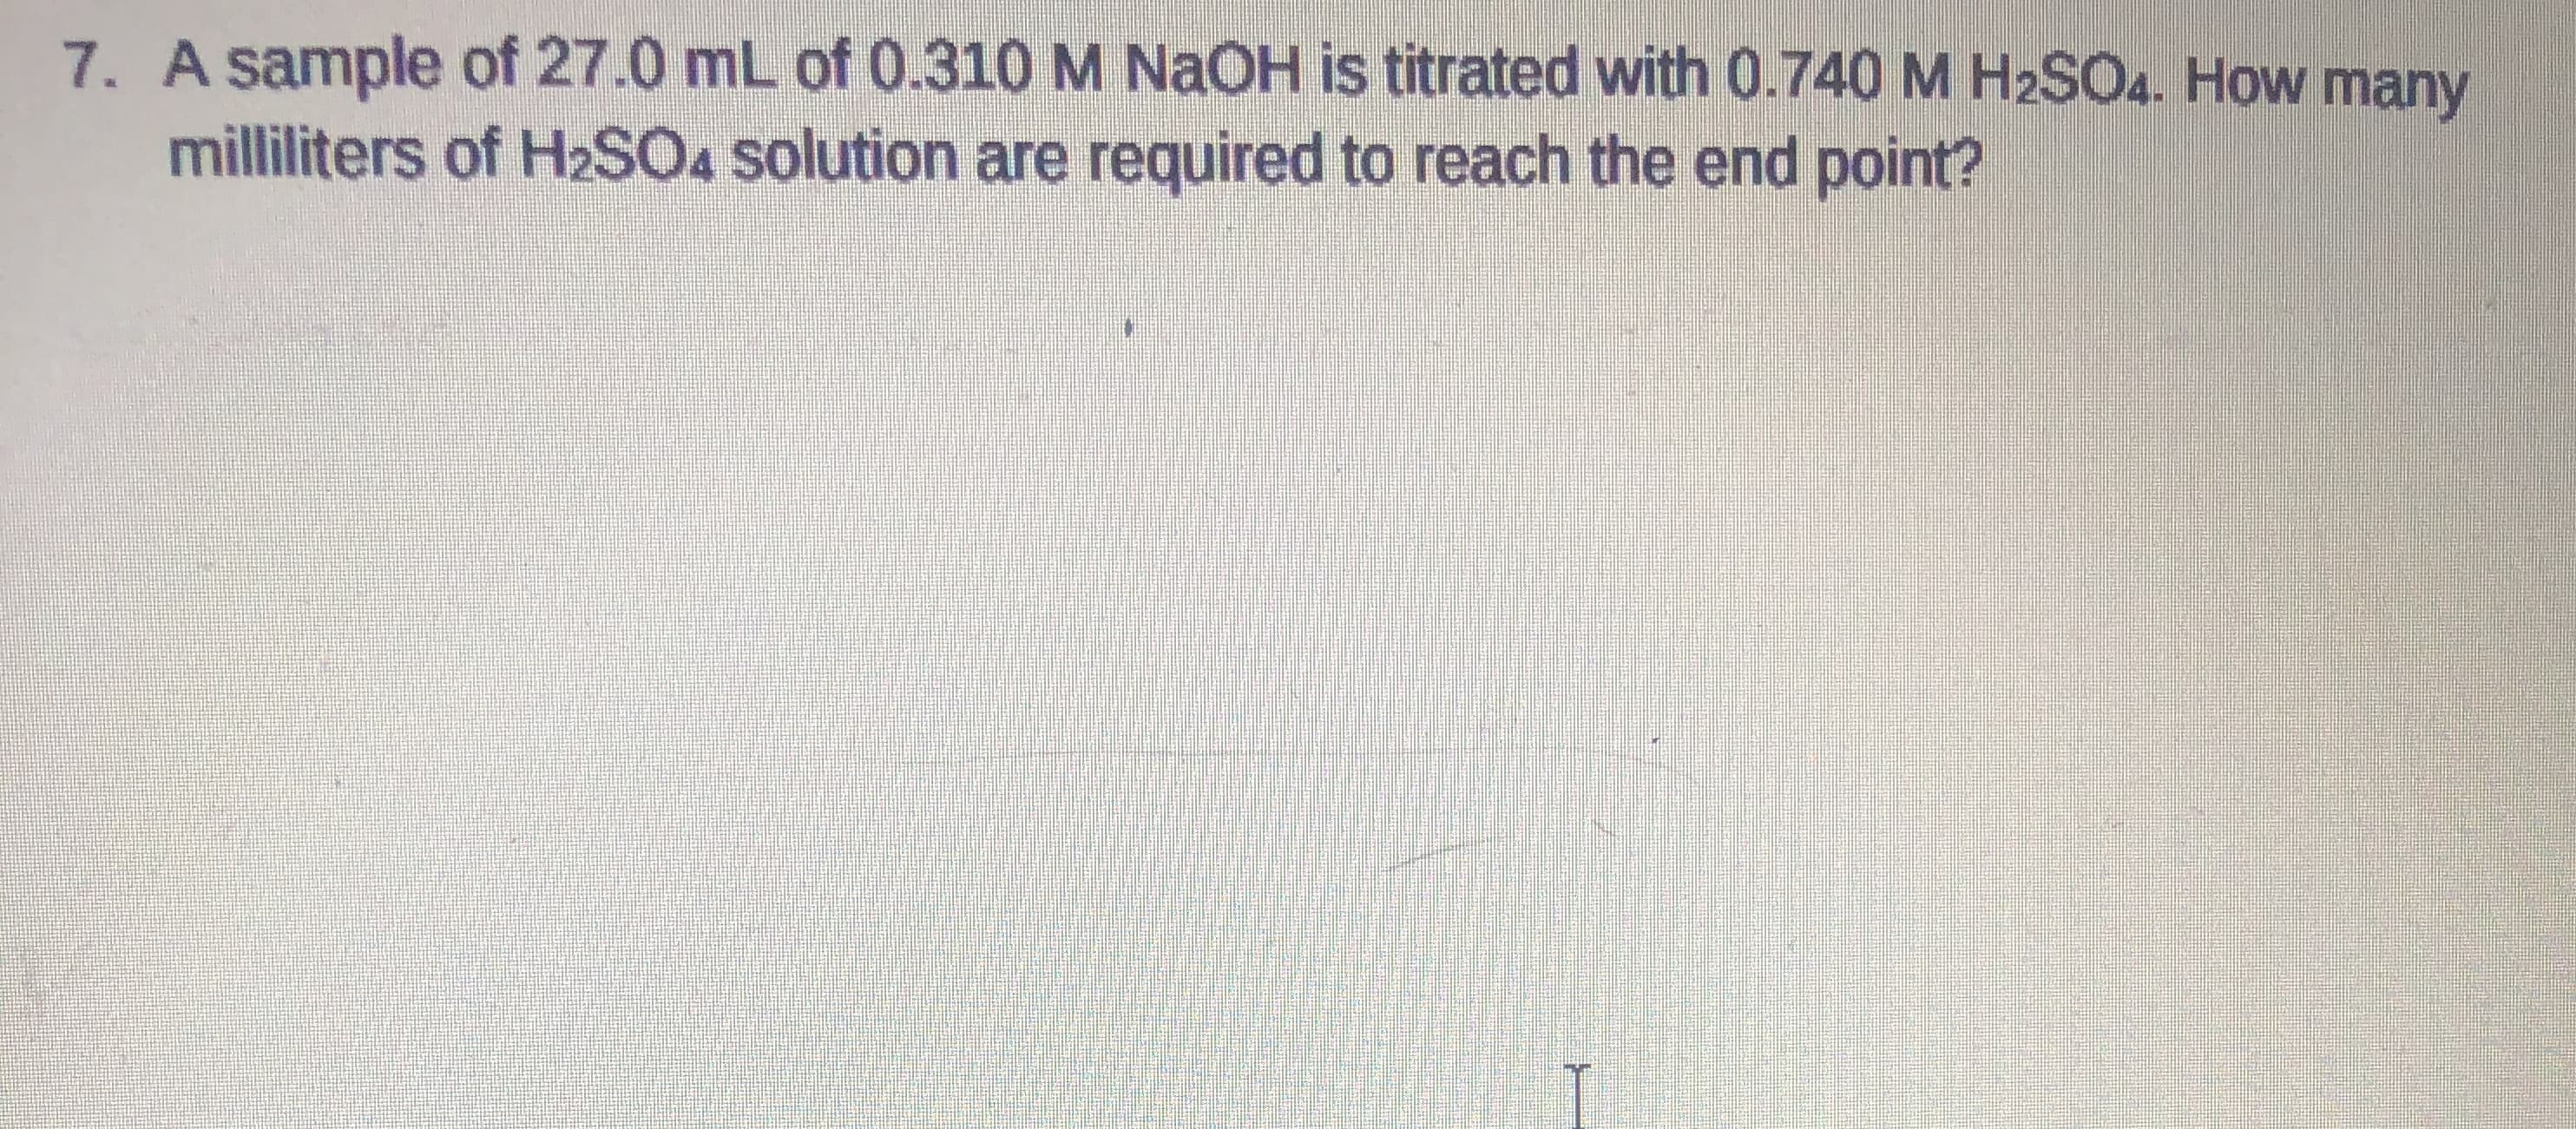 A sample of 27.0 mL of 0.310 M NAOH is titrated with 0.740 M H2SO4. How many
milliliters of H2SO4 solution are required to reach the end point?
